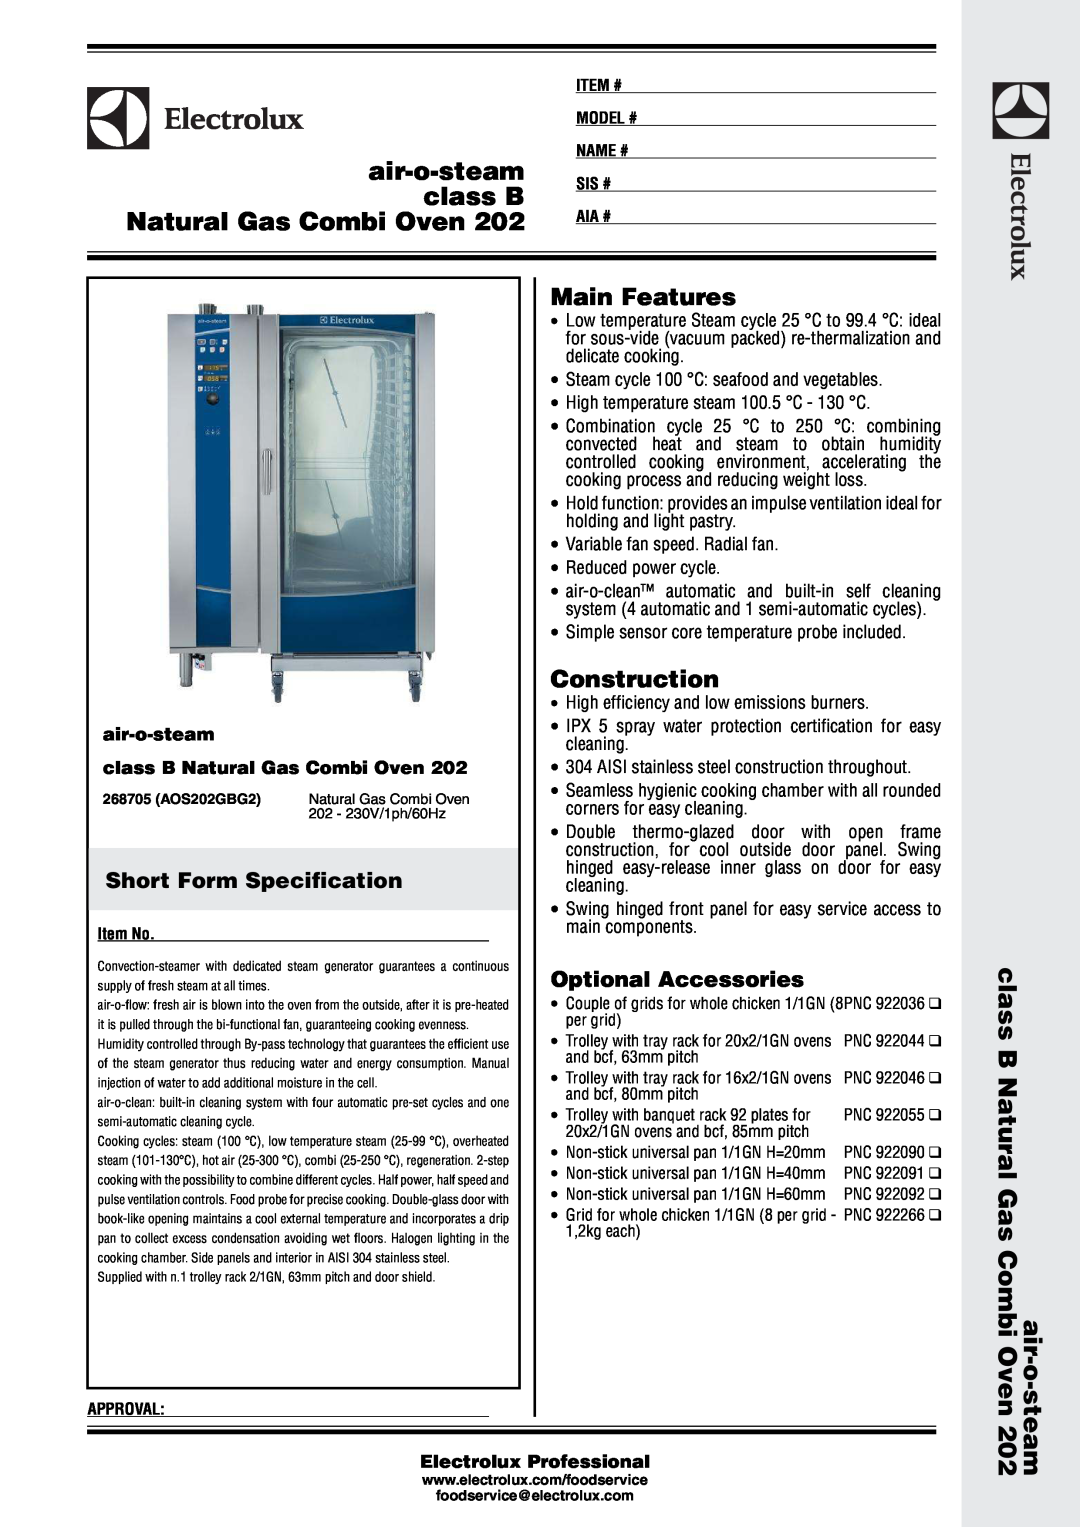 Electrolux 202 manual air-o-convect Electric Hybrid Convection Oven, Short Form Specification, Main Features 